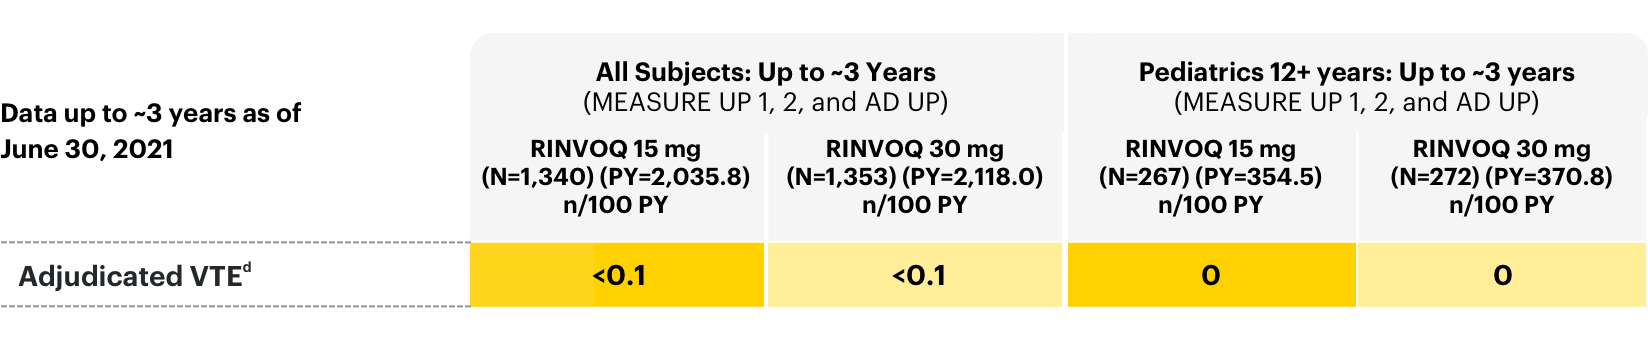 Table outlining the adverse events of adjudicated VTE in all subjects: long-term integrated safety with RINVOQ® (upadacitinib).